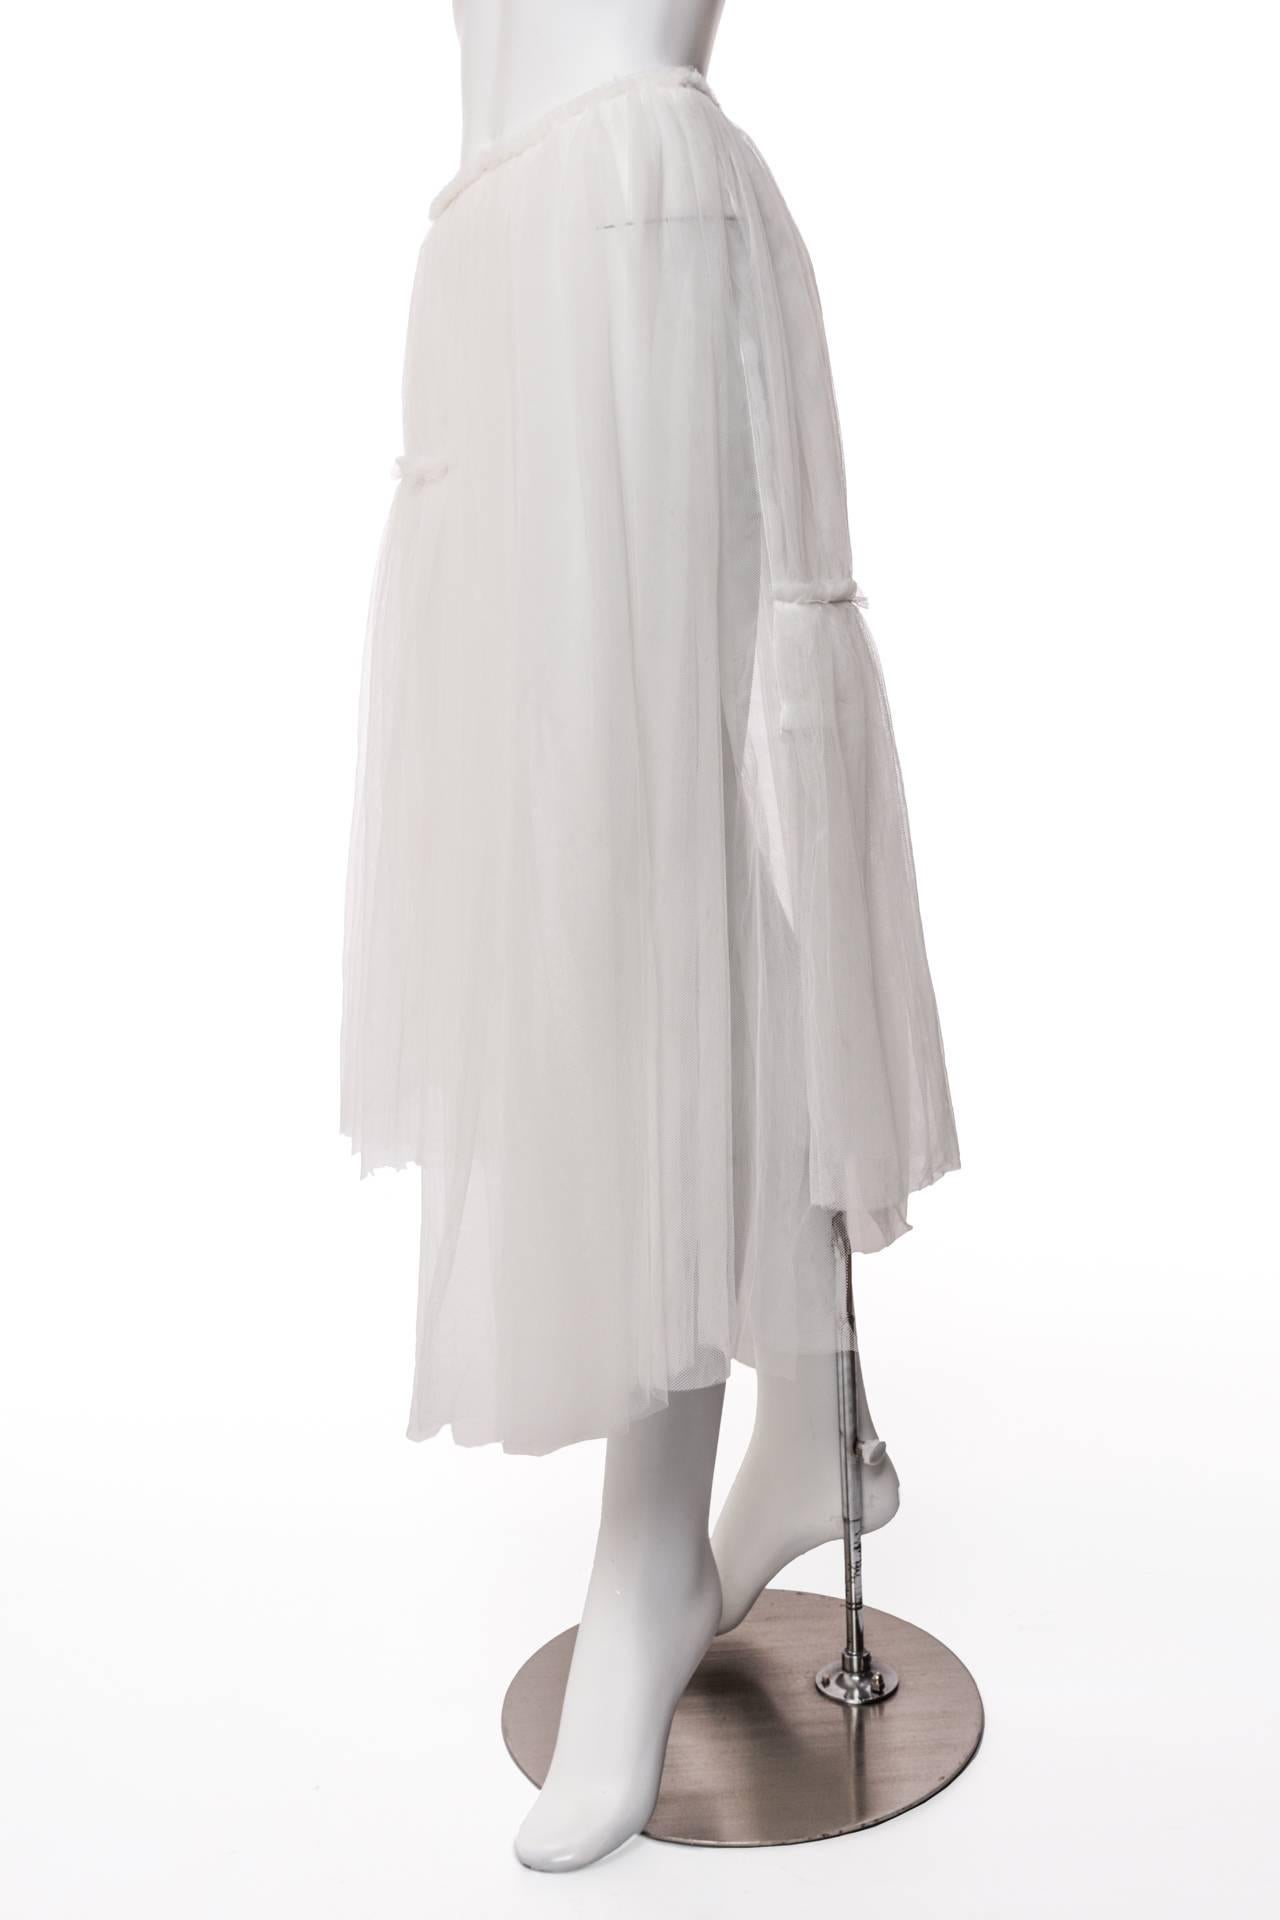 2007 Rei Kawakubo Comme des Garçons White Layered Tulle Skirt In Excellent Condition For Sale In Boca Raton, FL